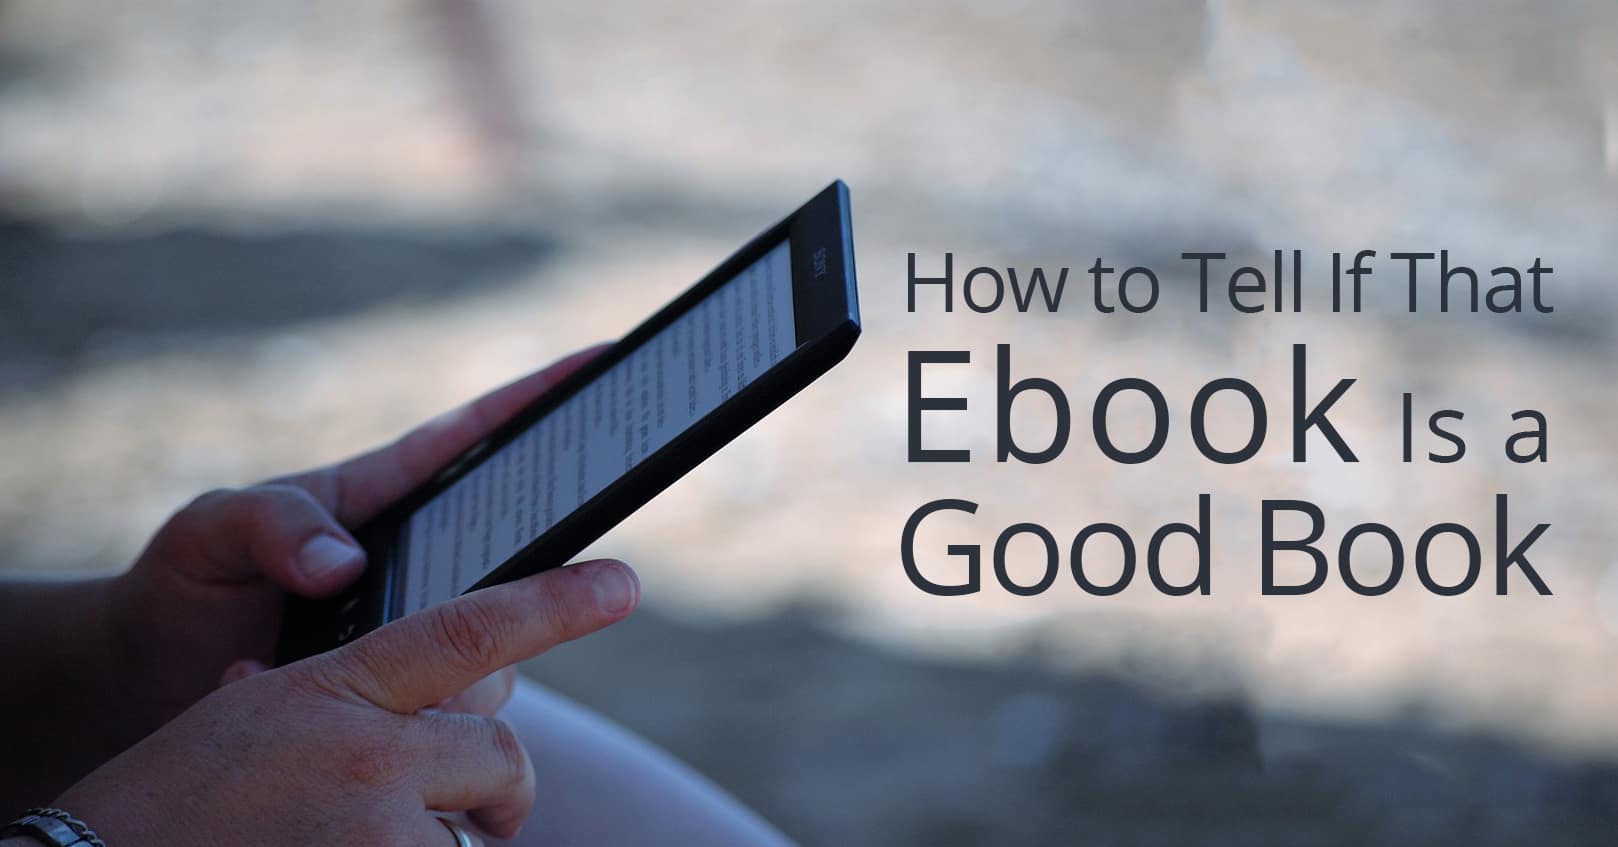 How to Tell If That Ebook Is a Good Book